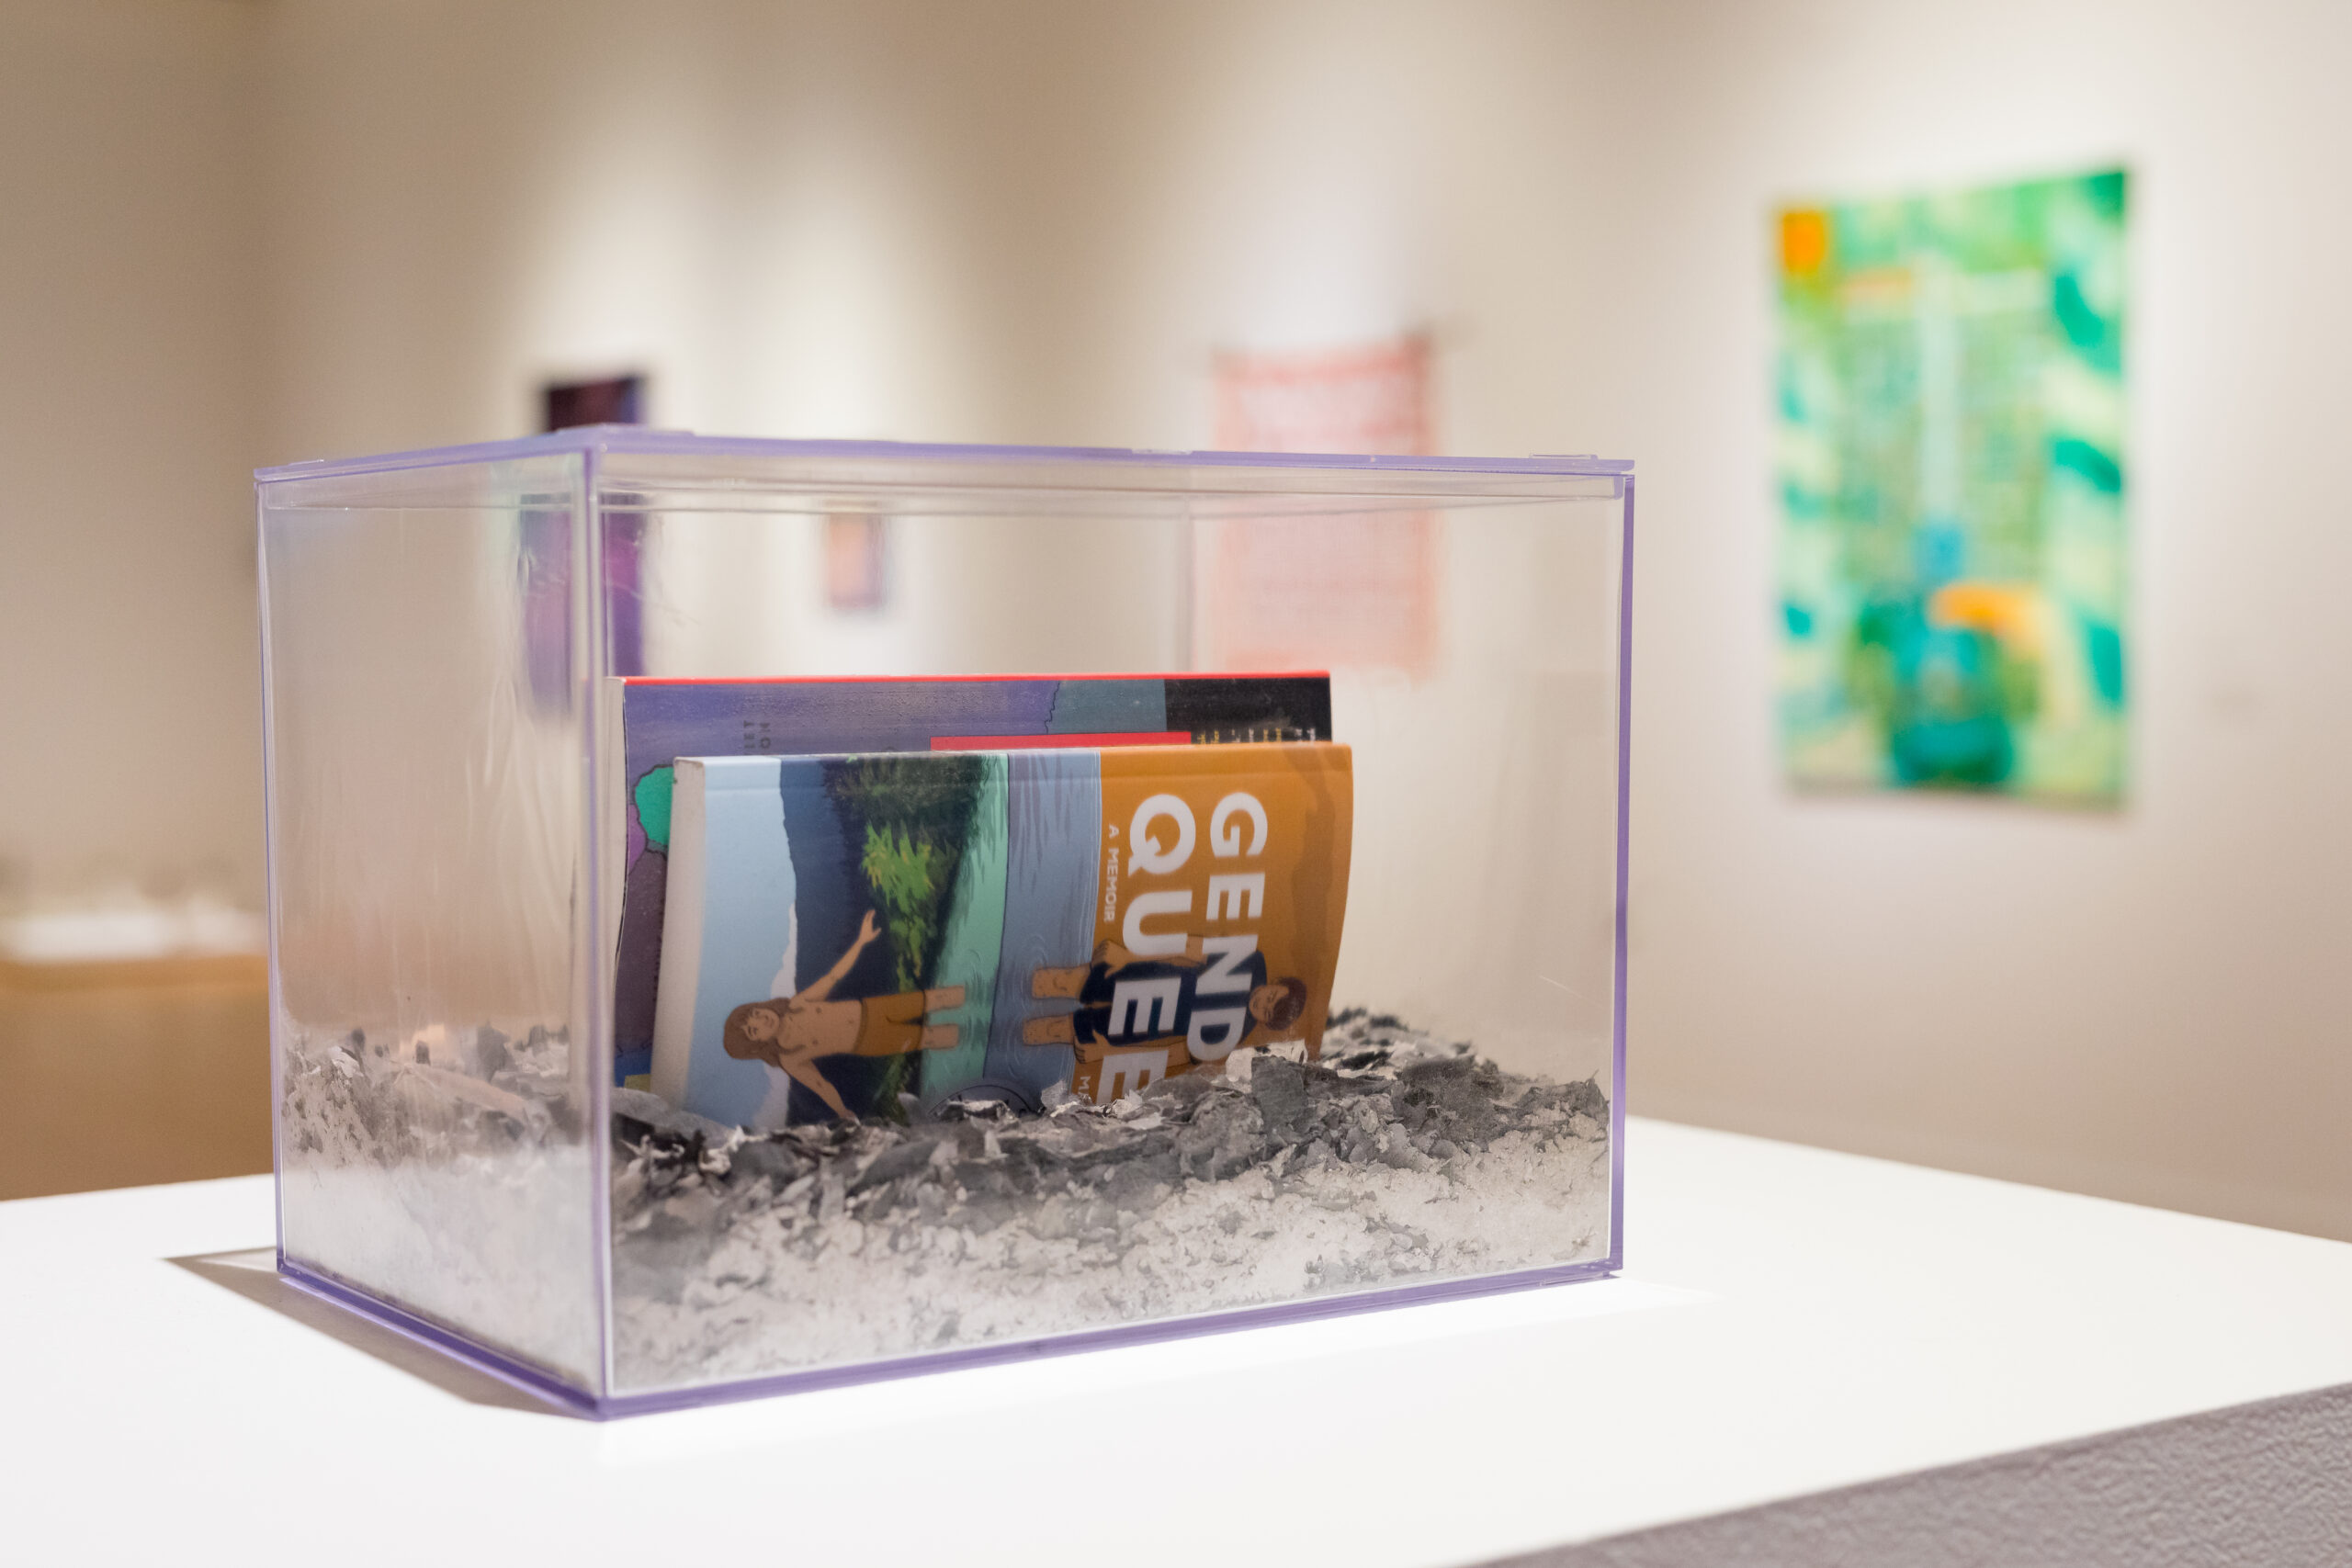 Rise from the Ashes is an artwork by Maggie Kerrigan that consists of two banned books and the ashes of 7 burned books in a lucite box.